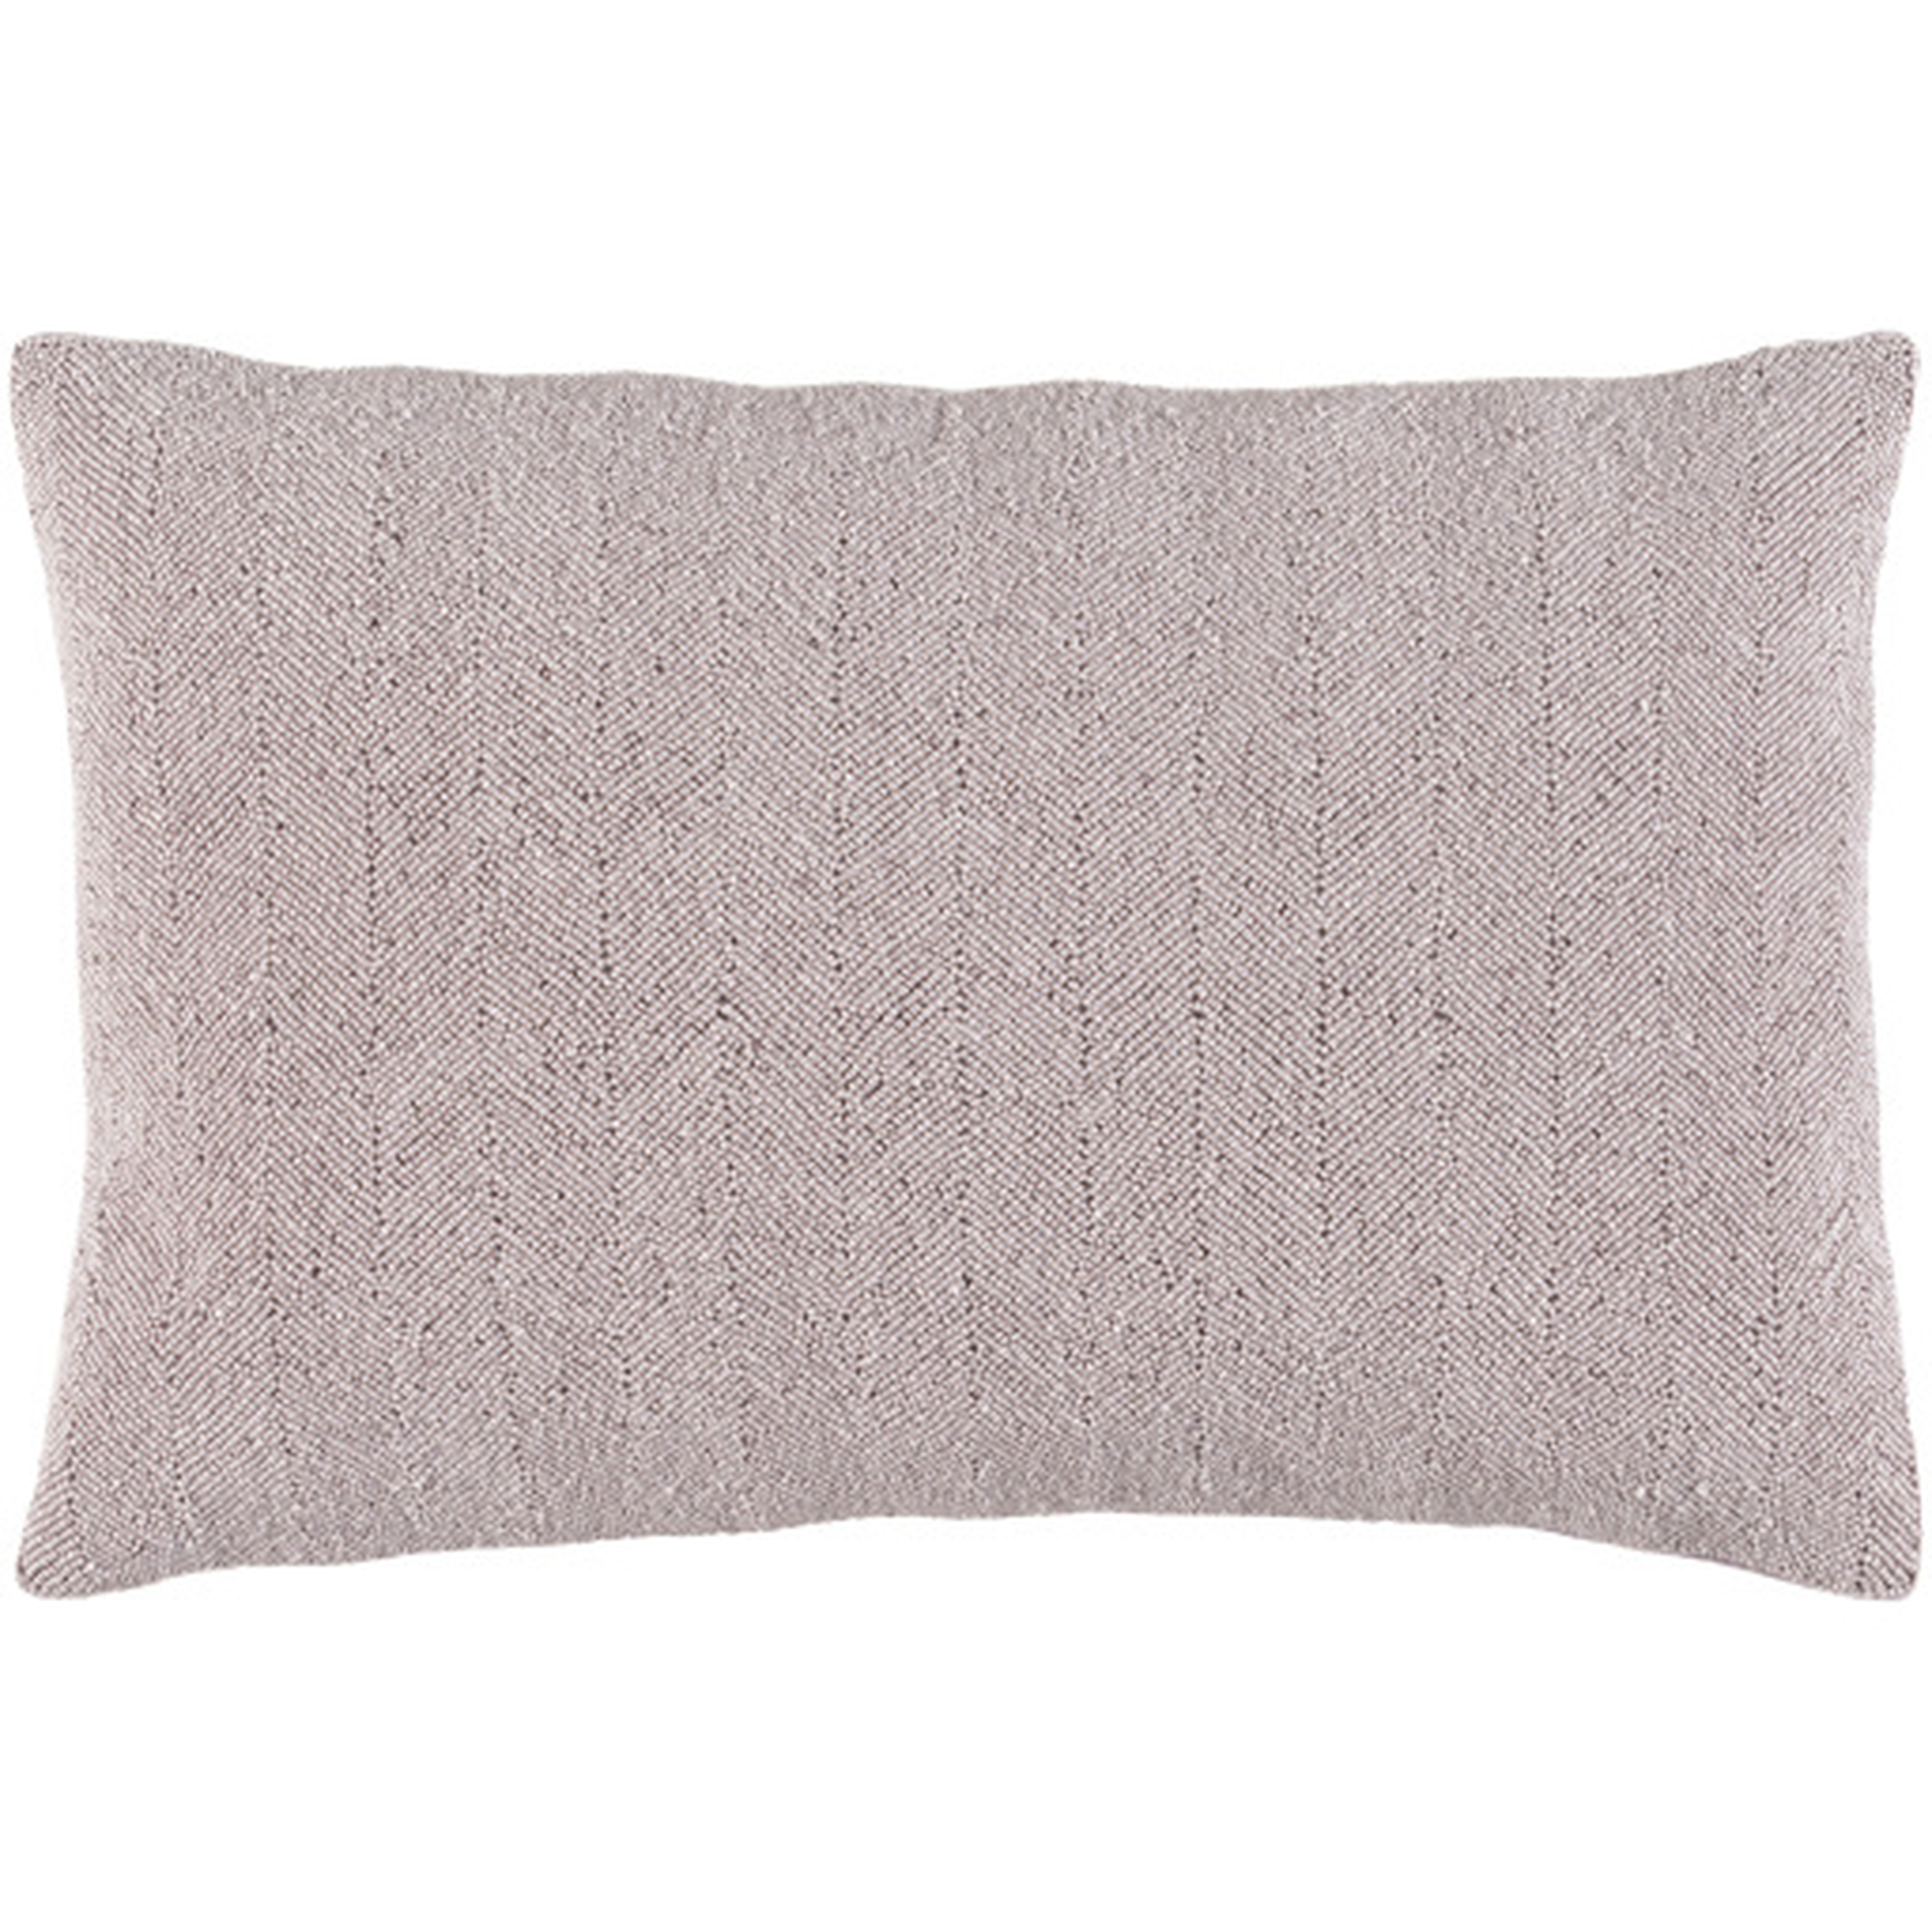 Gianna Throw Pillow, Small, pillow cover only - Surya